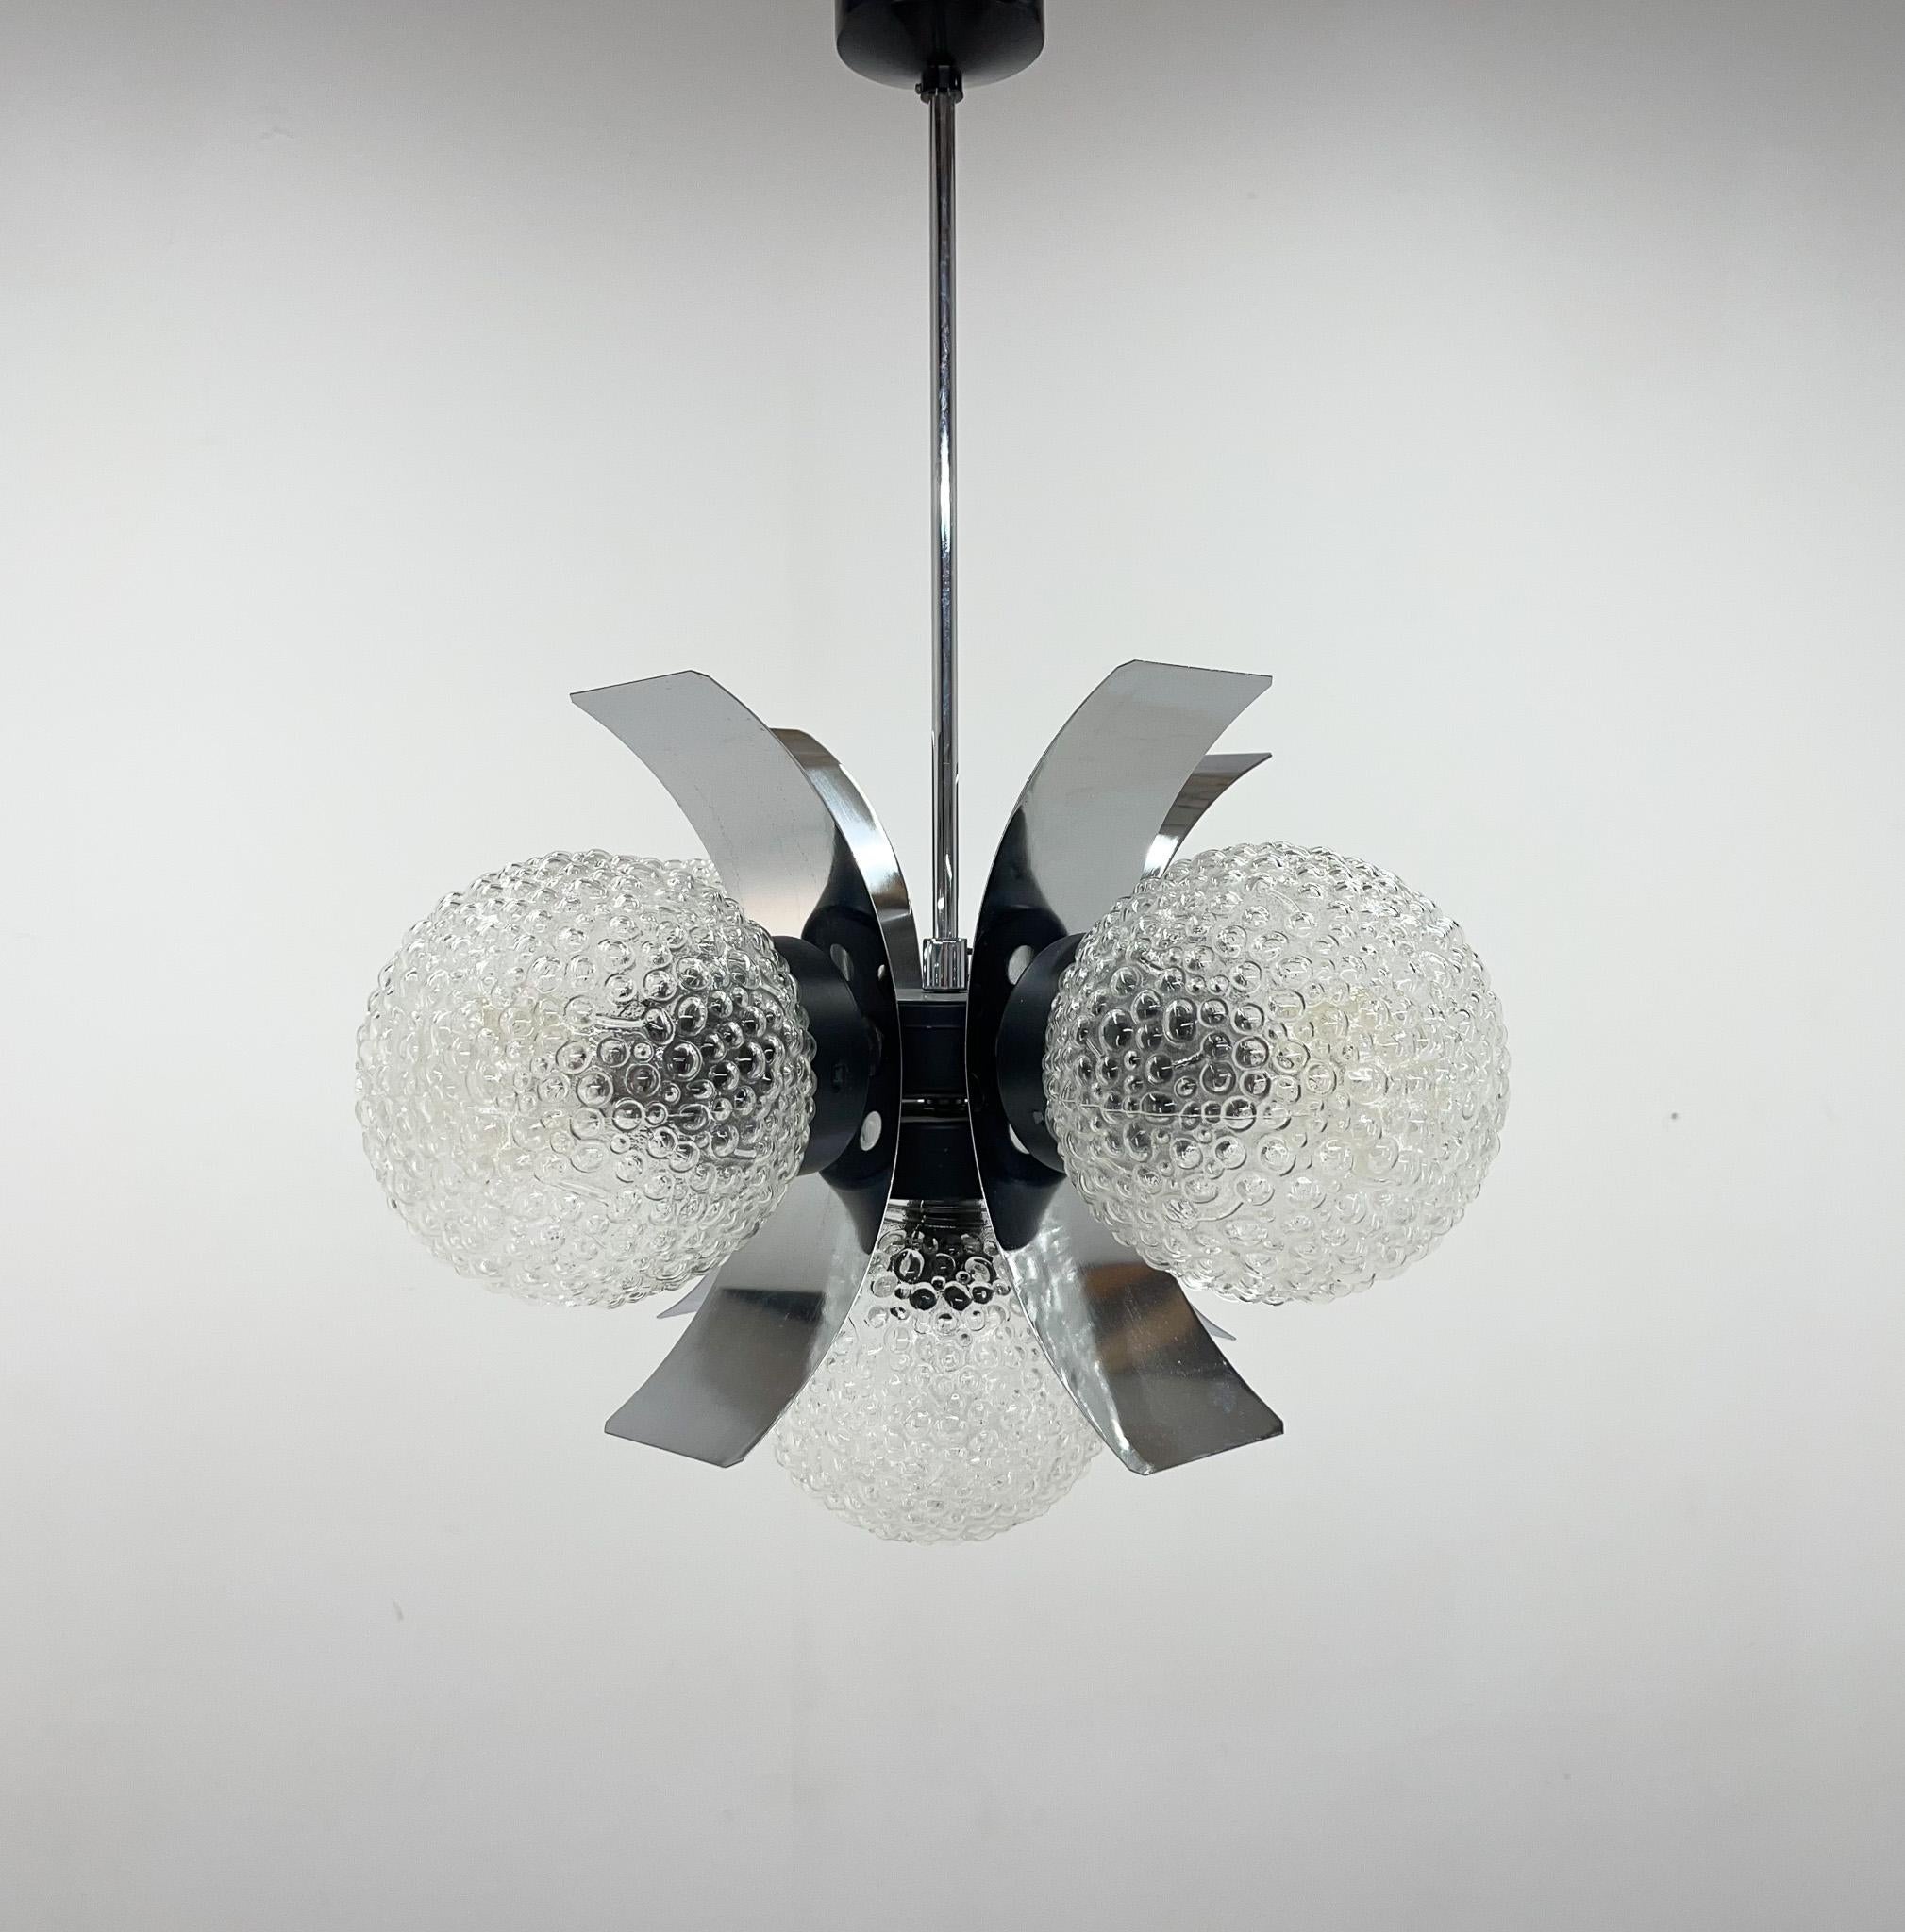 Vintage chandelier made of chrome and pressed glass in former Czechoslovakia in the 1970's. Manufactured by Elektroinstala Decín. Bulb: 5 x E25-E27.